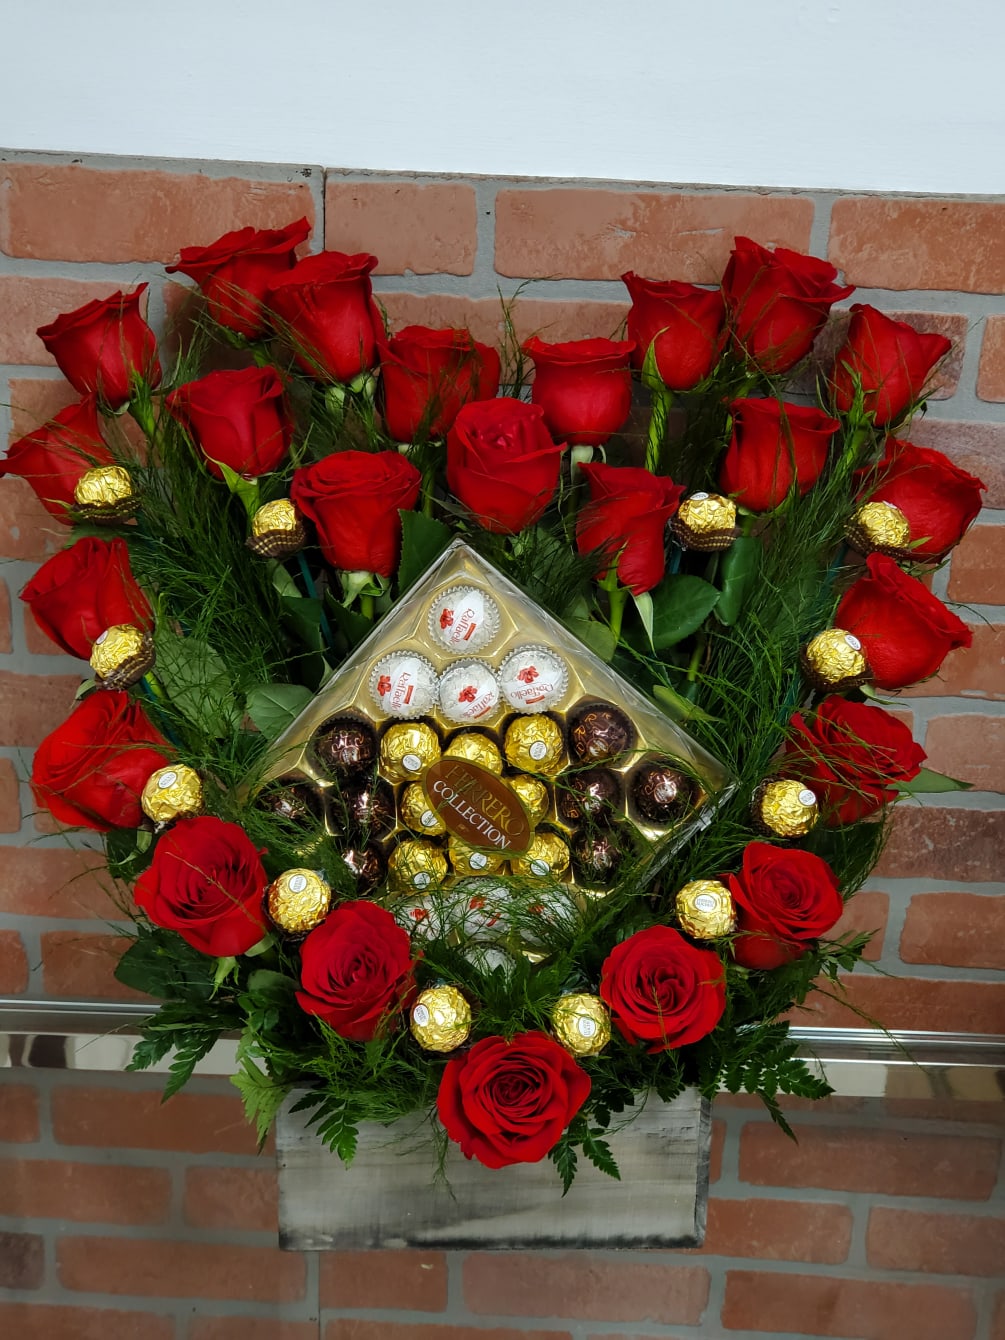 24 Red roses with a box of chocolate in a wood box.